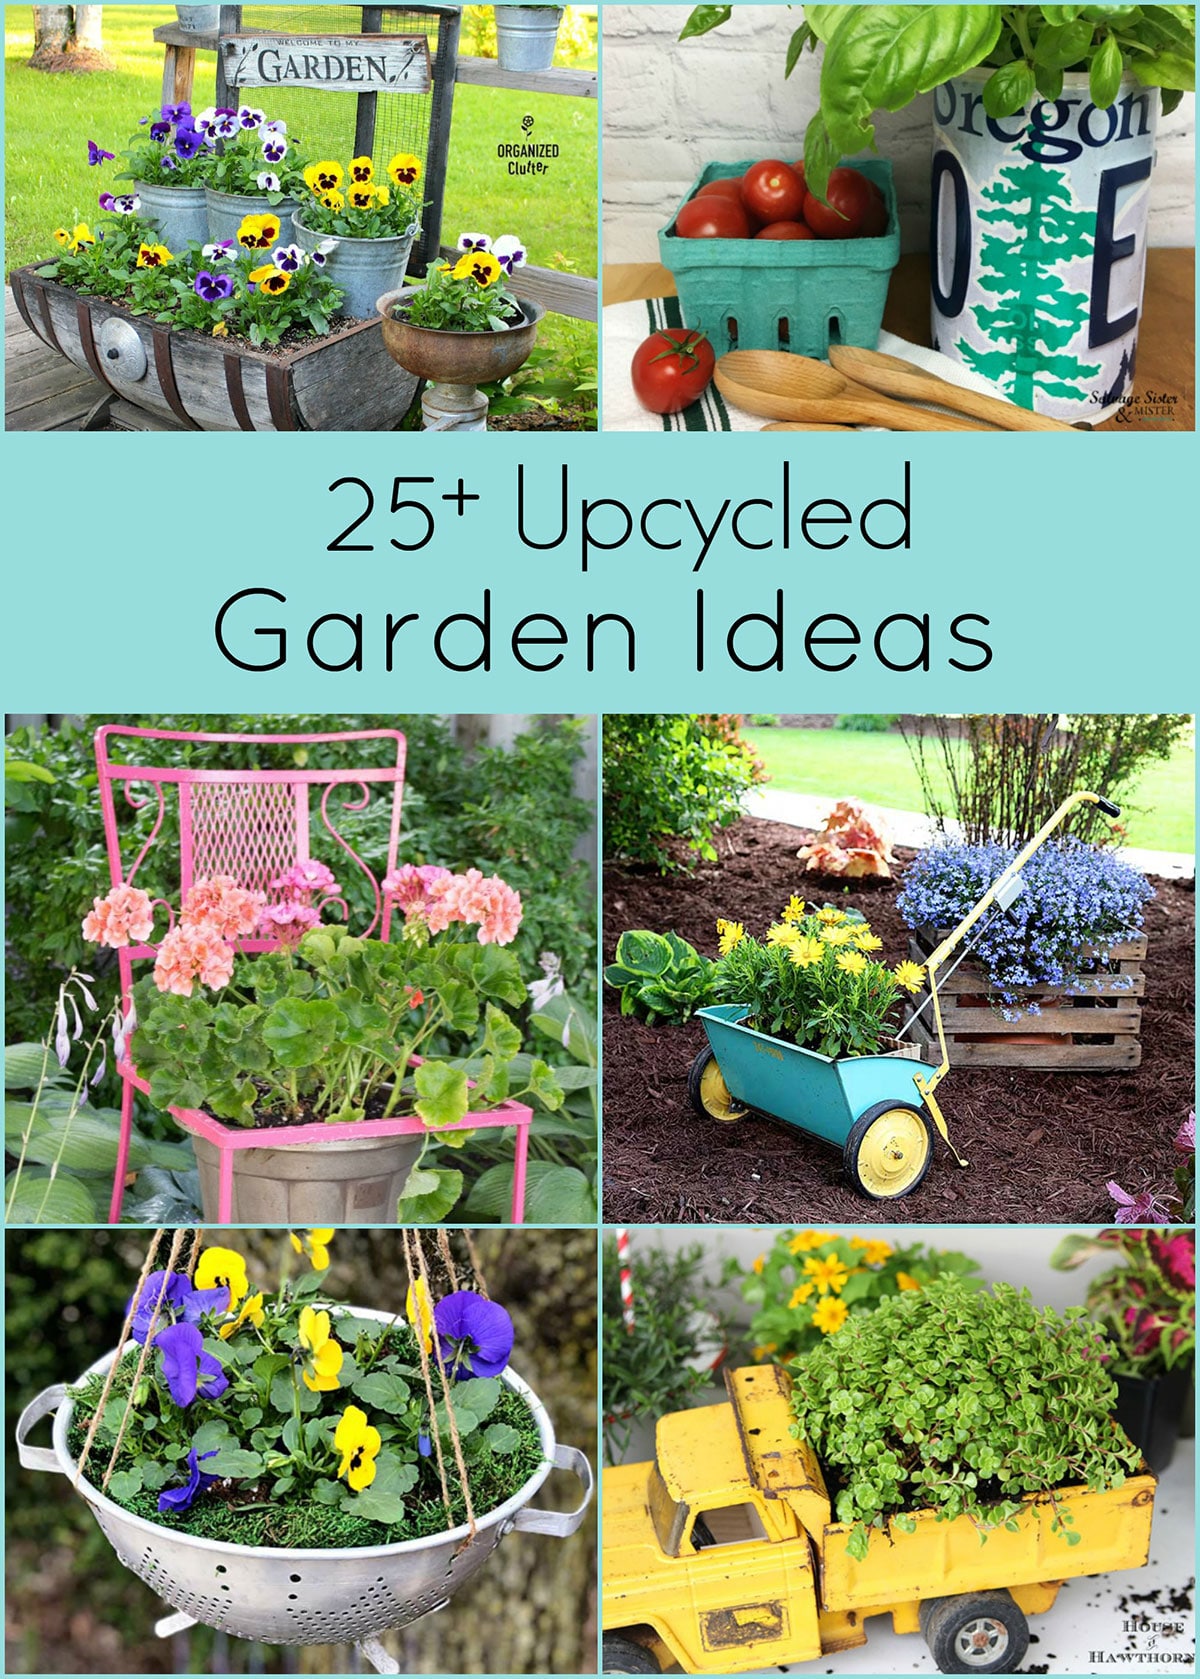 Garden Upcycling Upcycled Garden Projects